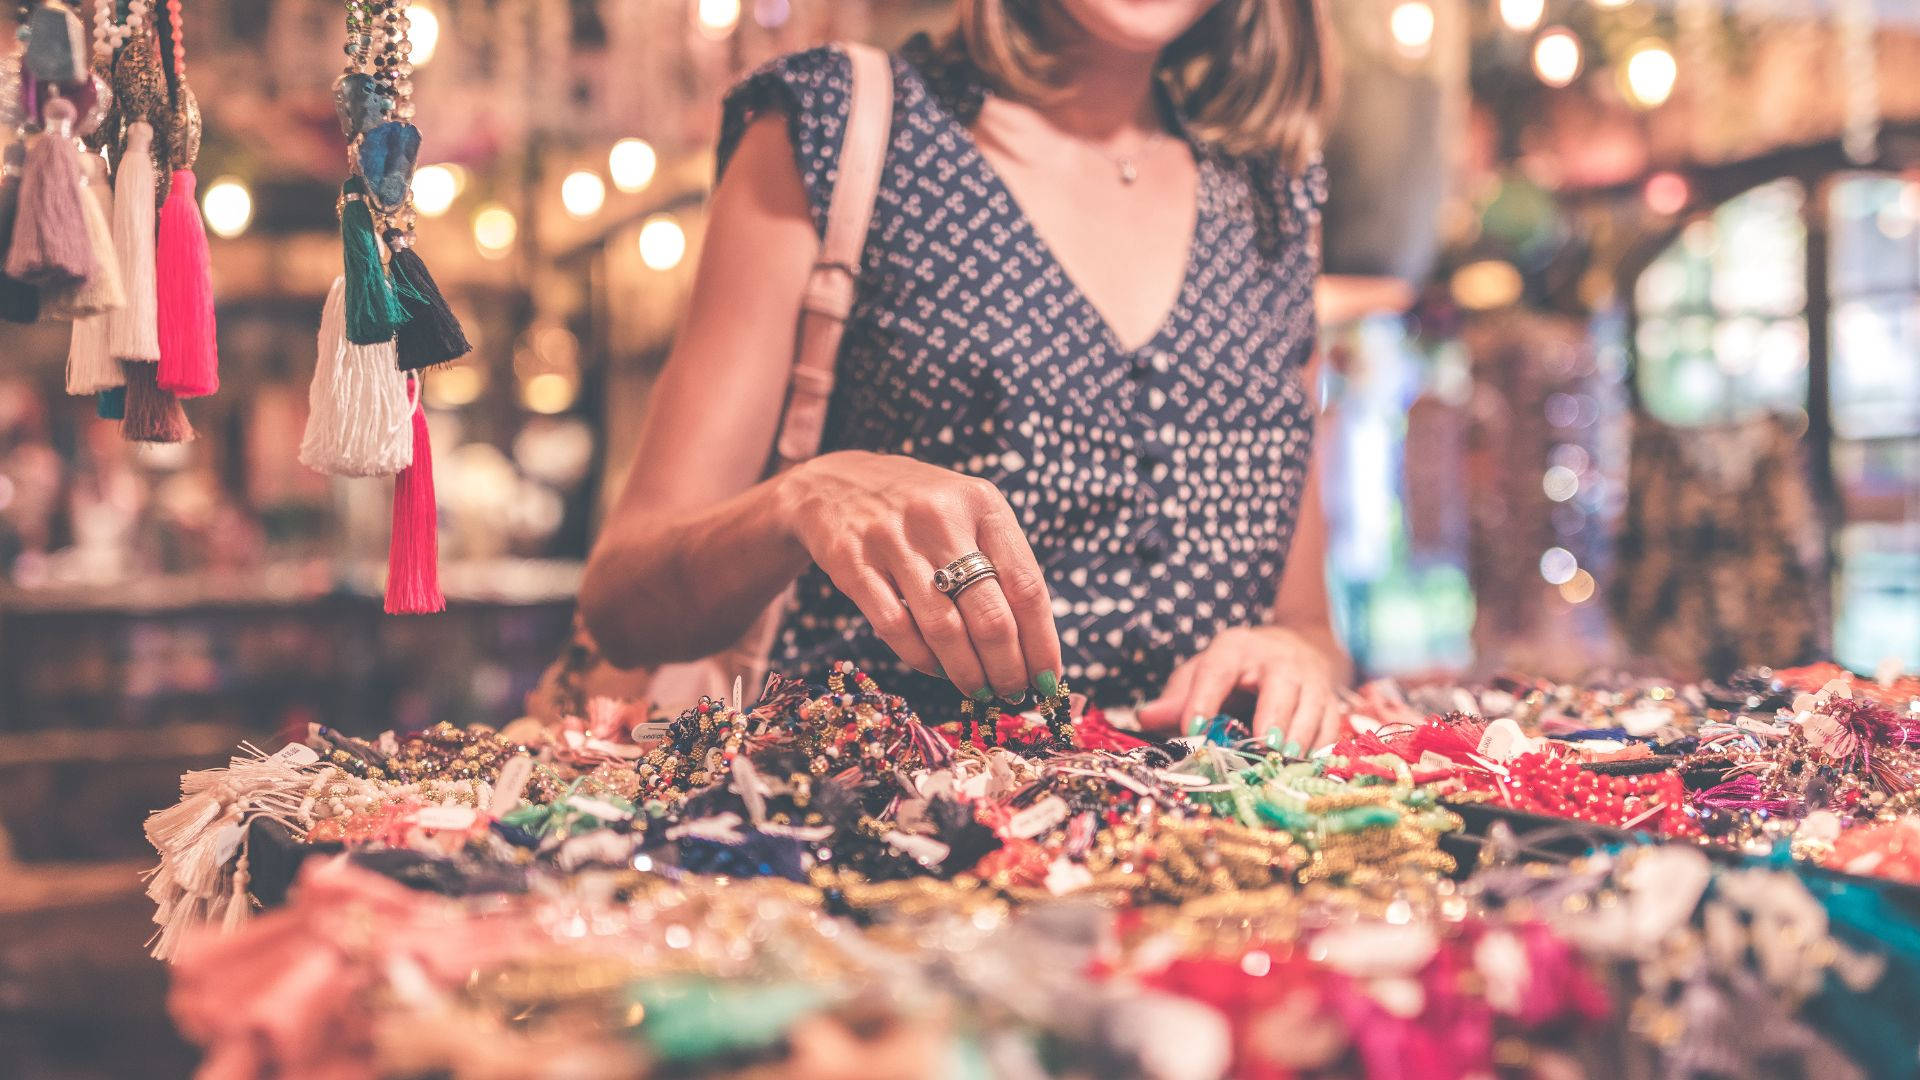 Pieces Of Jewelry Market Picture